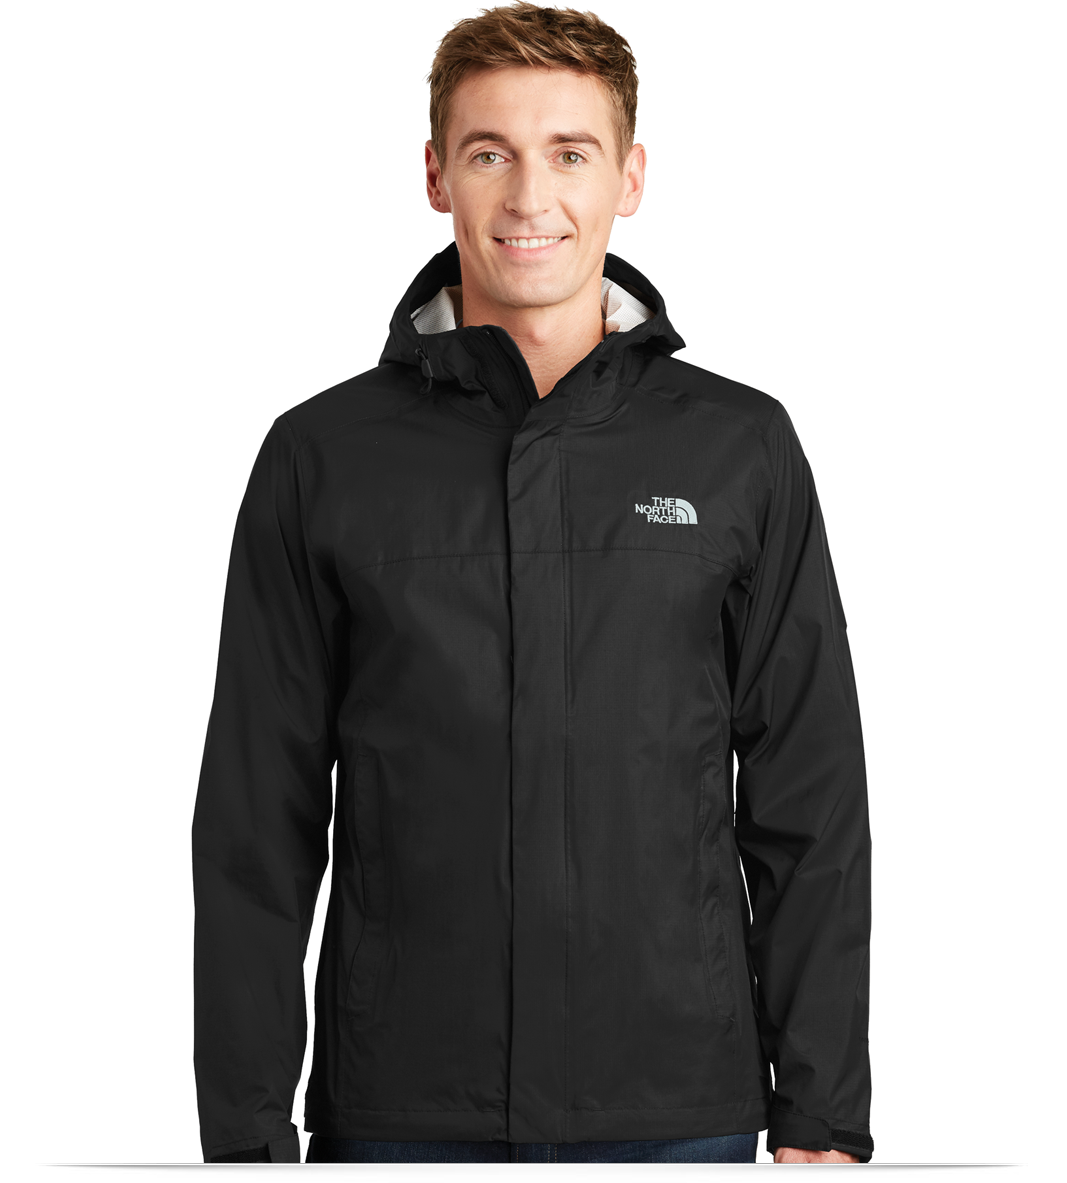 The North Face DryVent Rain Jacket with 